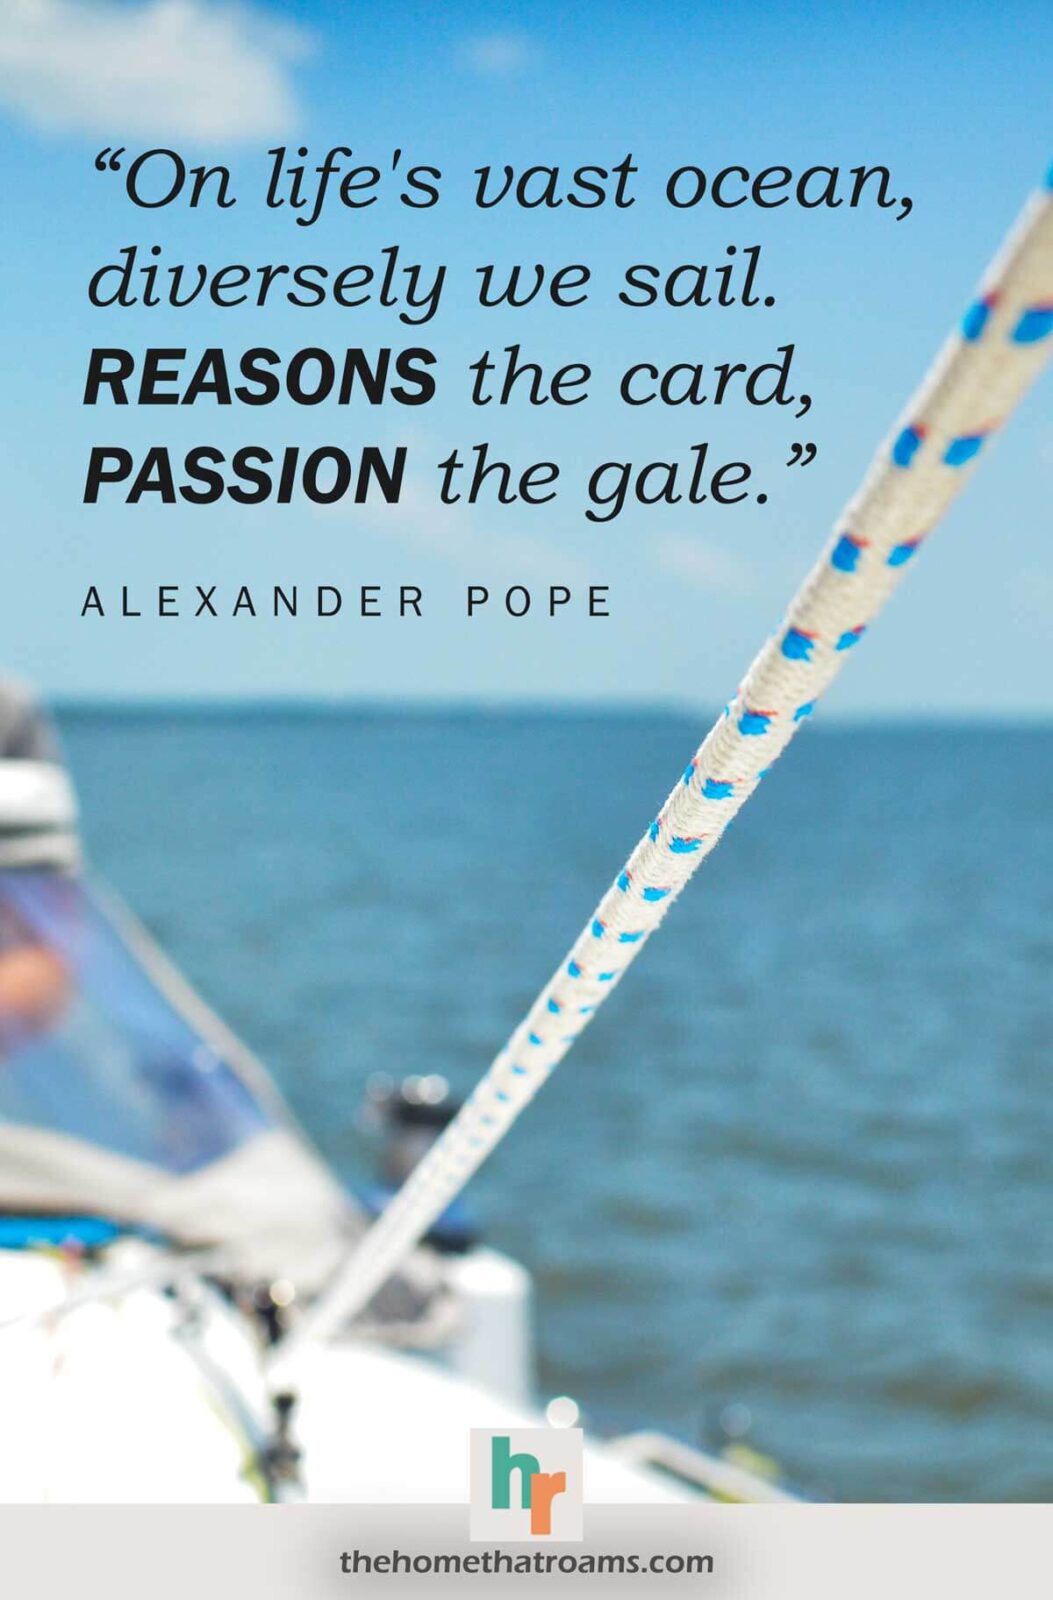 Sailing quote about life, “On life’s vast ocean, diversely we sail. Reason the card, passion the gale.” - Alexander Pope, written above a jib sheet line with the ocean view in the background.